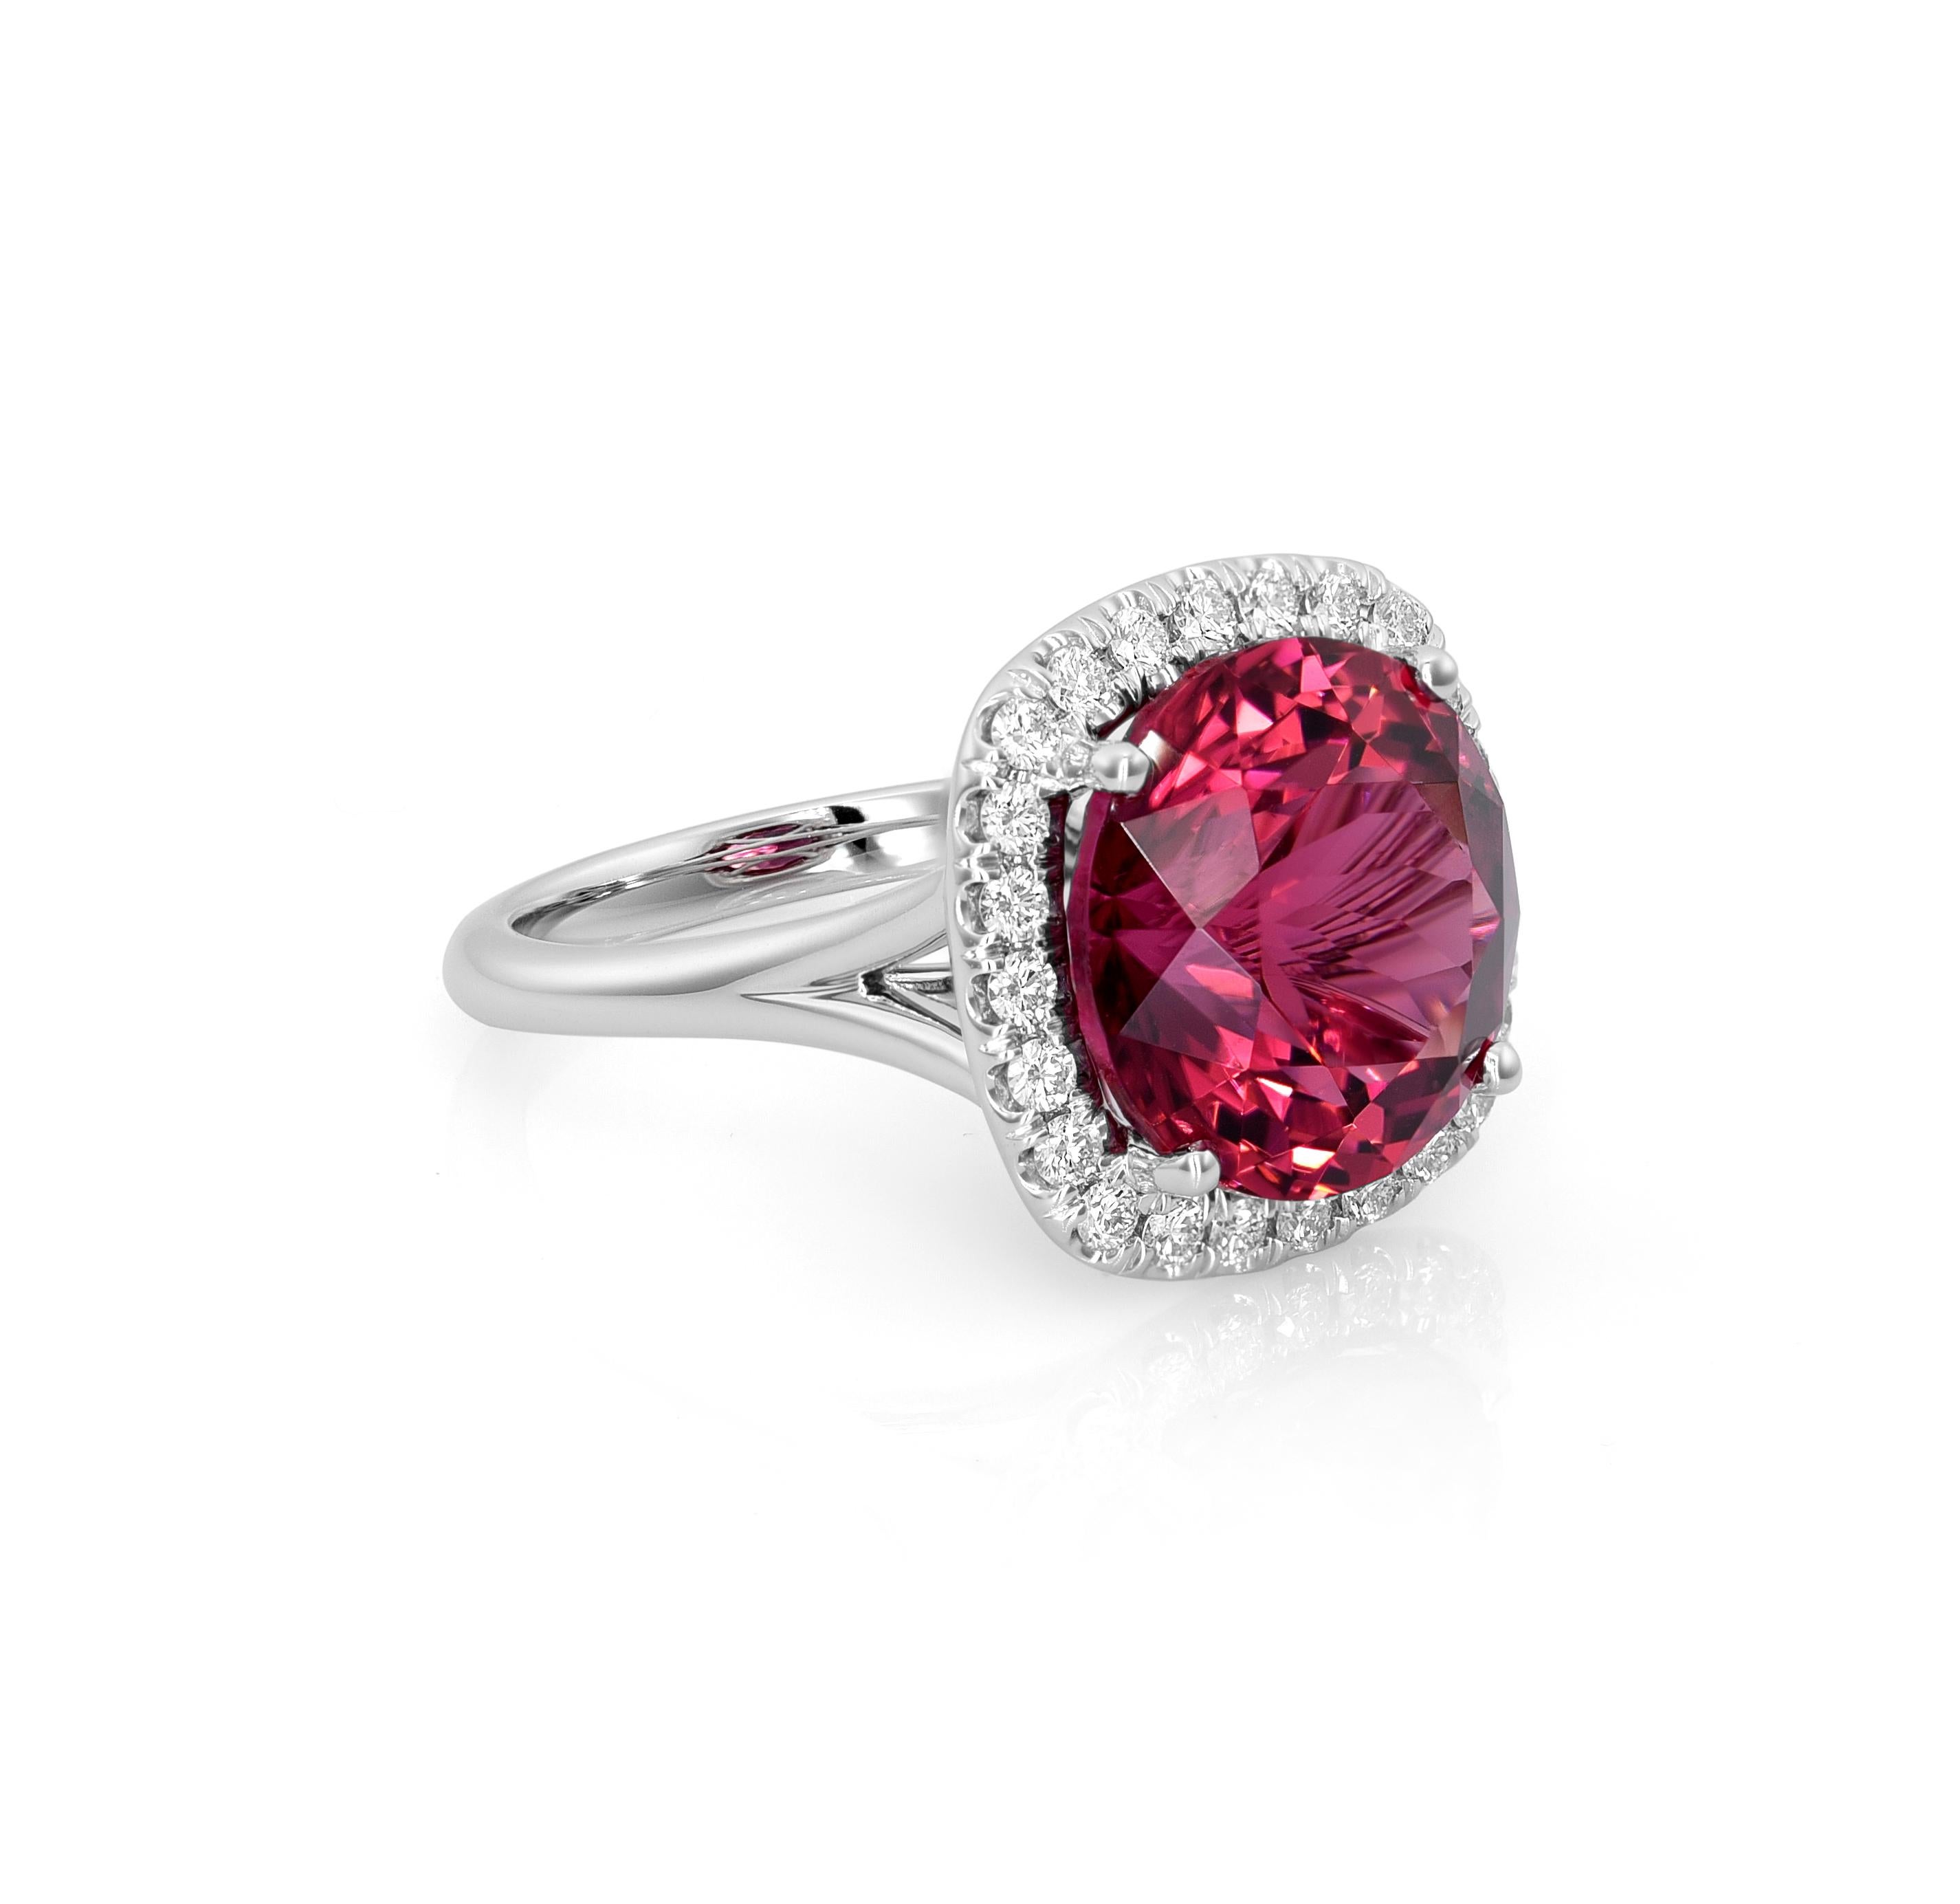 This exquisite jewelry piece boasts a captivating Natural Red Tourmaline gemstone, perfectly round and generously sized at 9.77 carats. With dimensions of 13.30 x 13.31 x 8.37 mm, the gemstone is showcased in a luxurious setting crafted from 14K